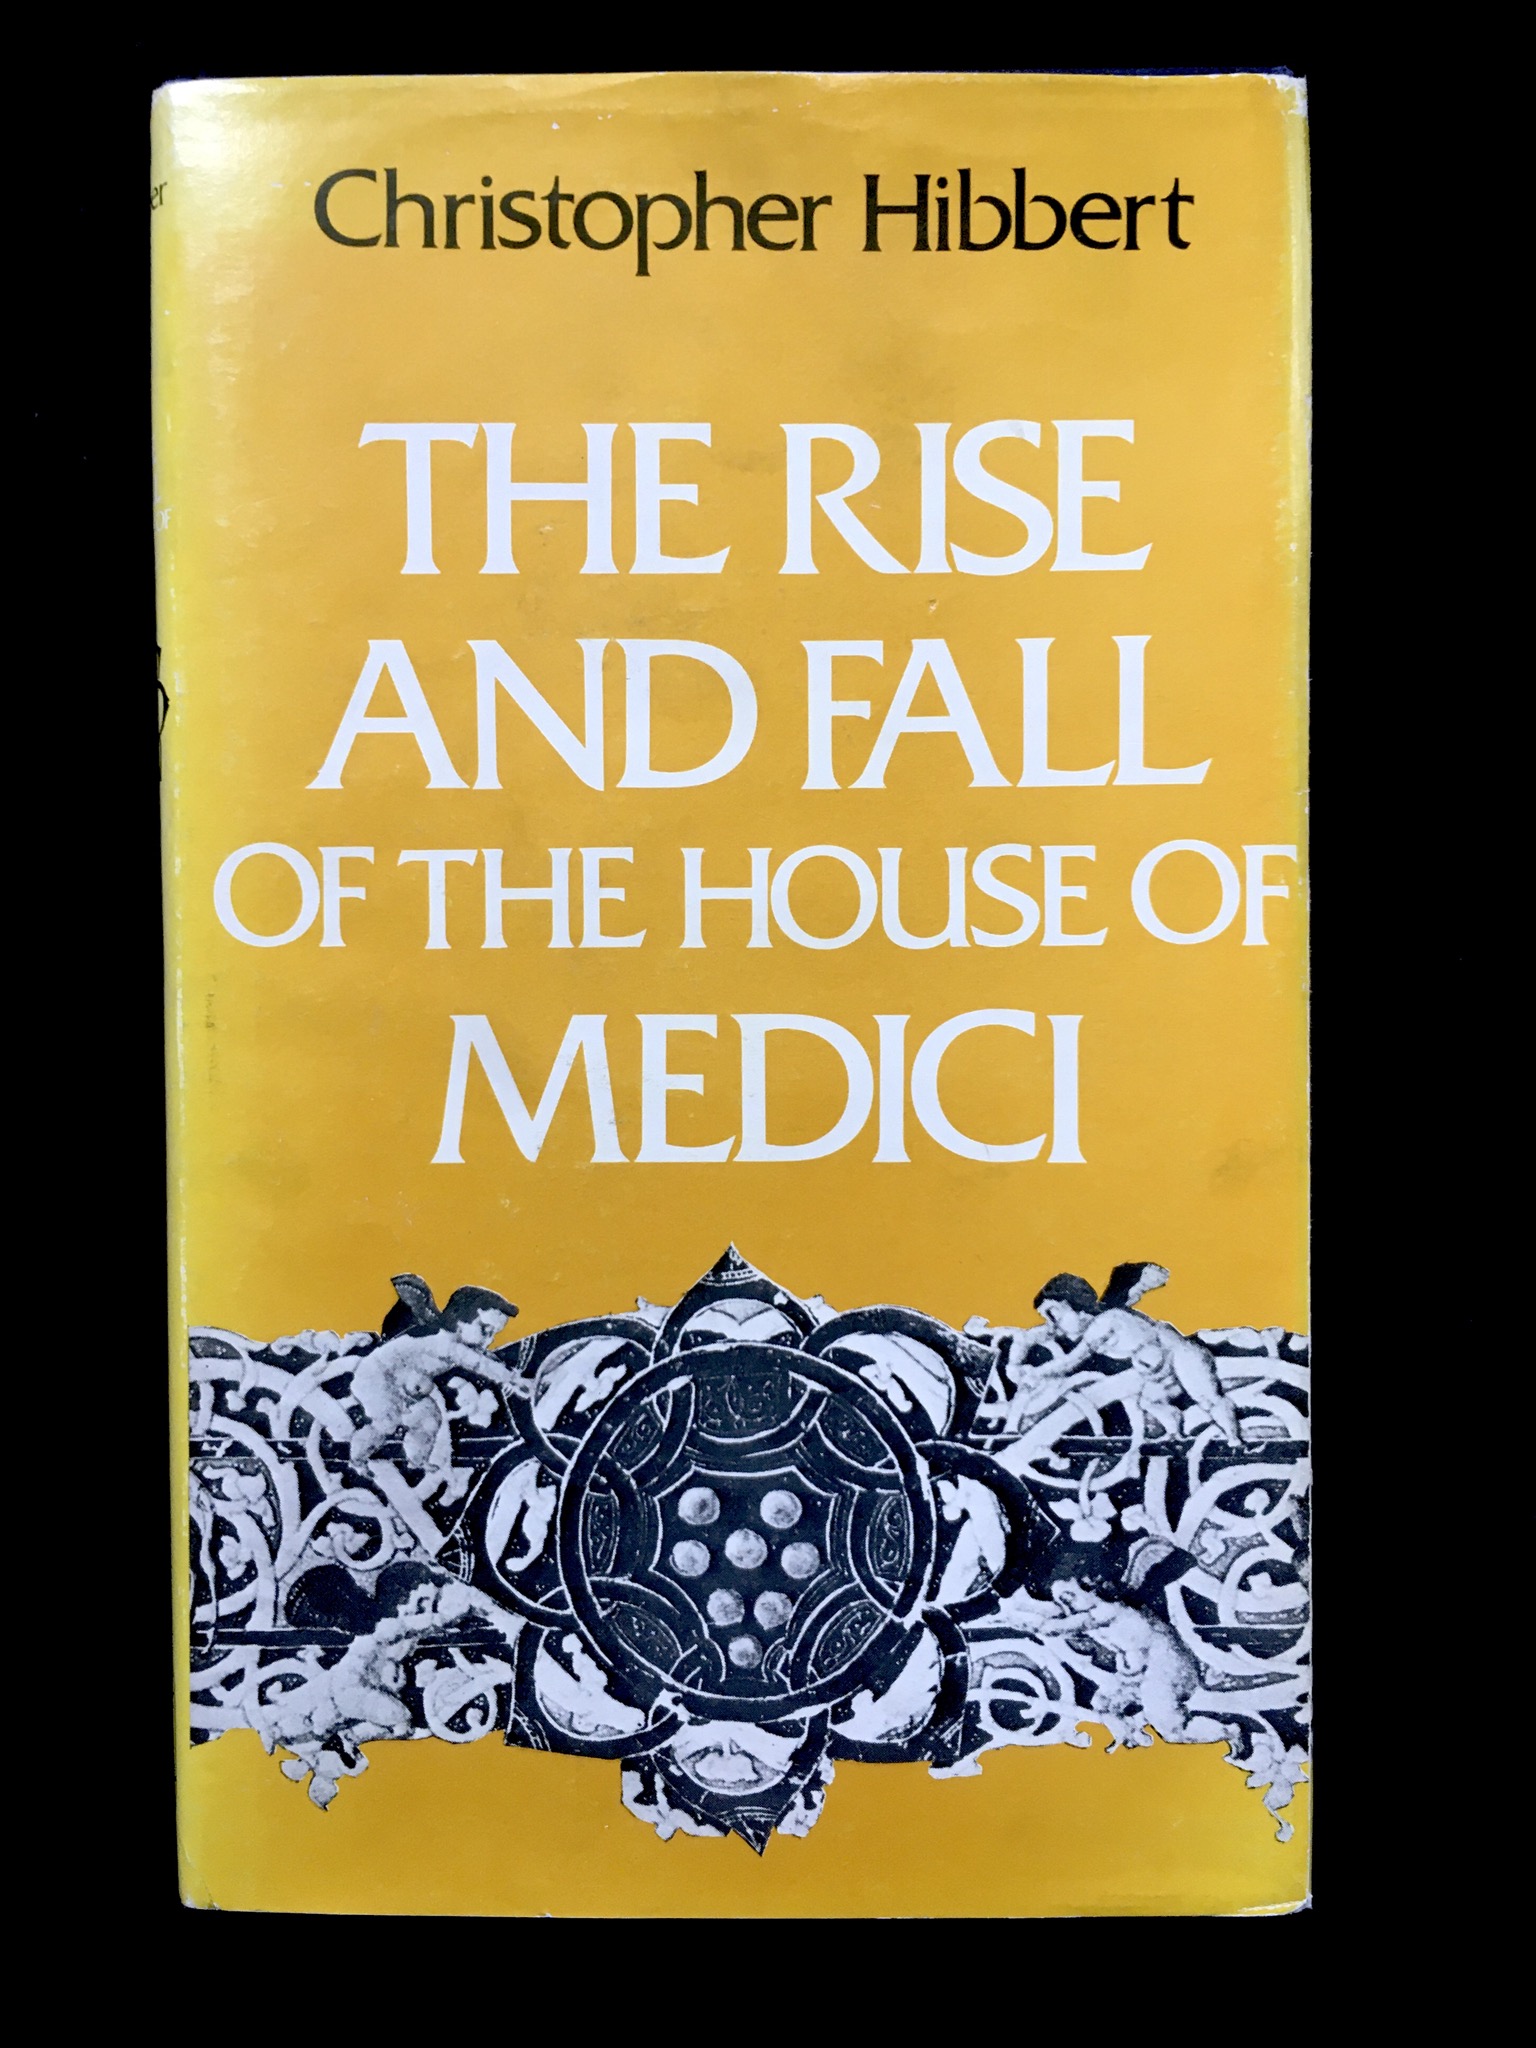 The Rise And Fall Of The House Of Medici by Christopher Hibbert